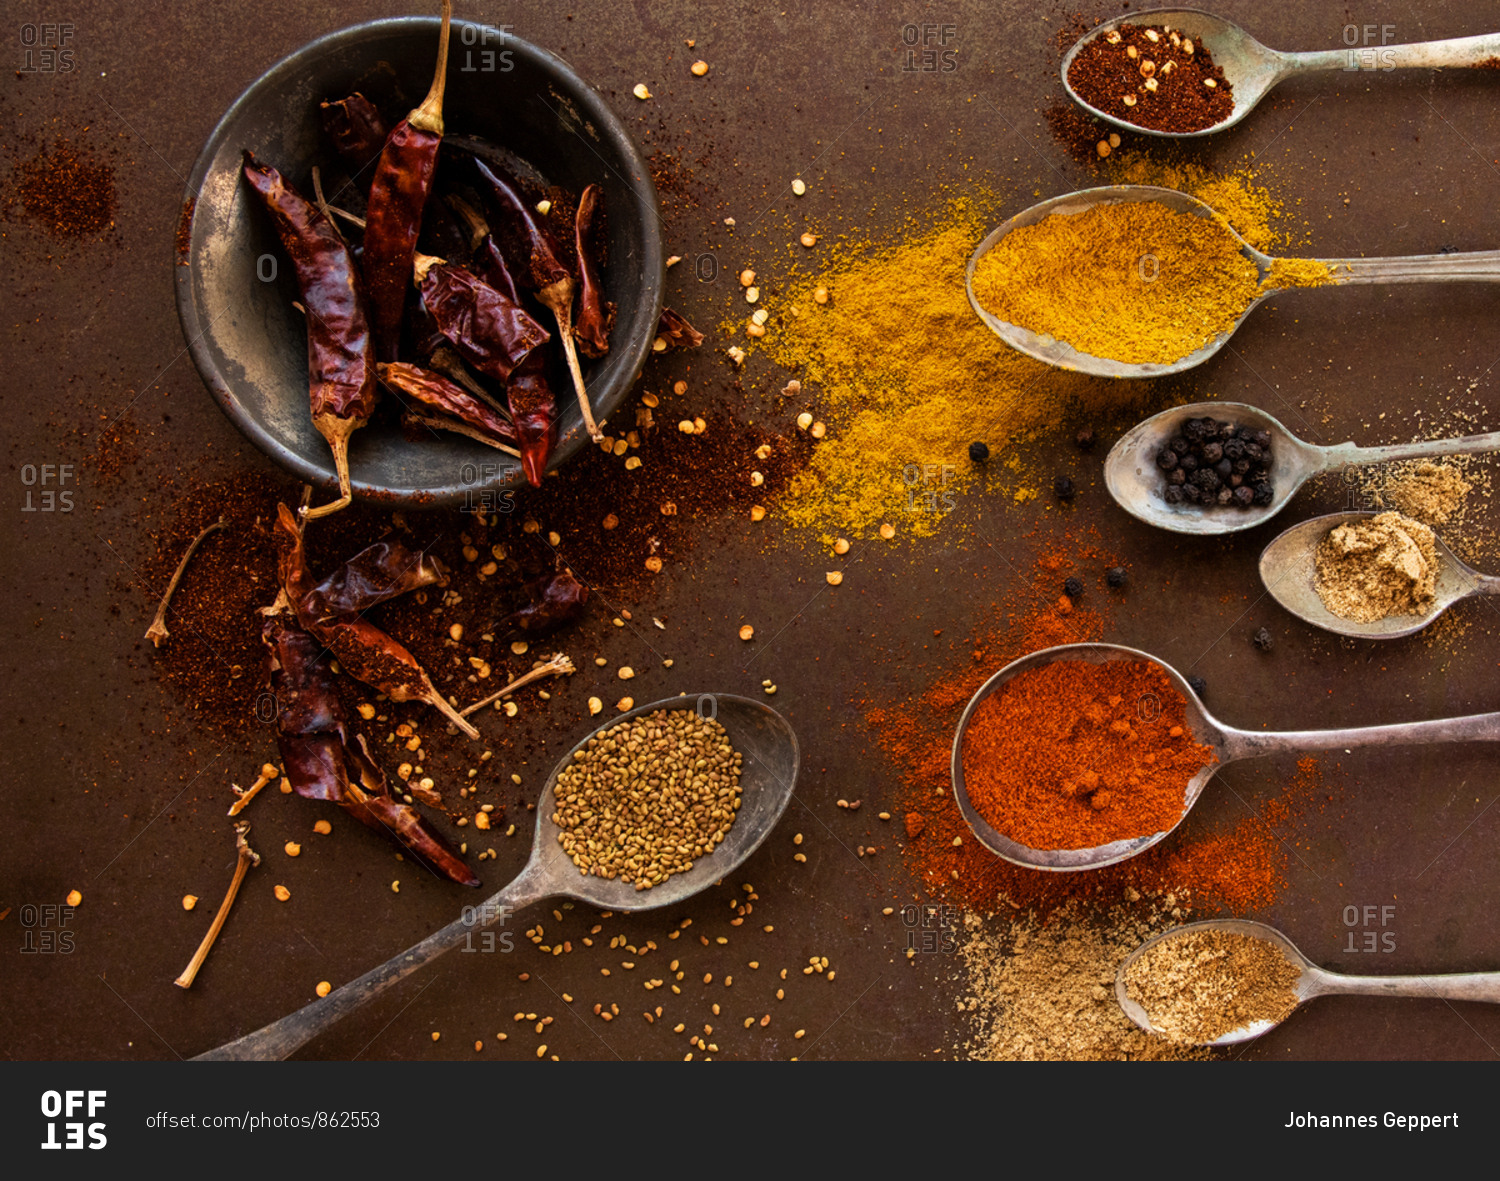 Artistic arrangement of vintage spoons filled with spices and dried chilli peppers